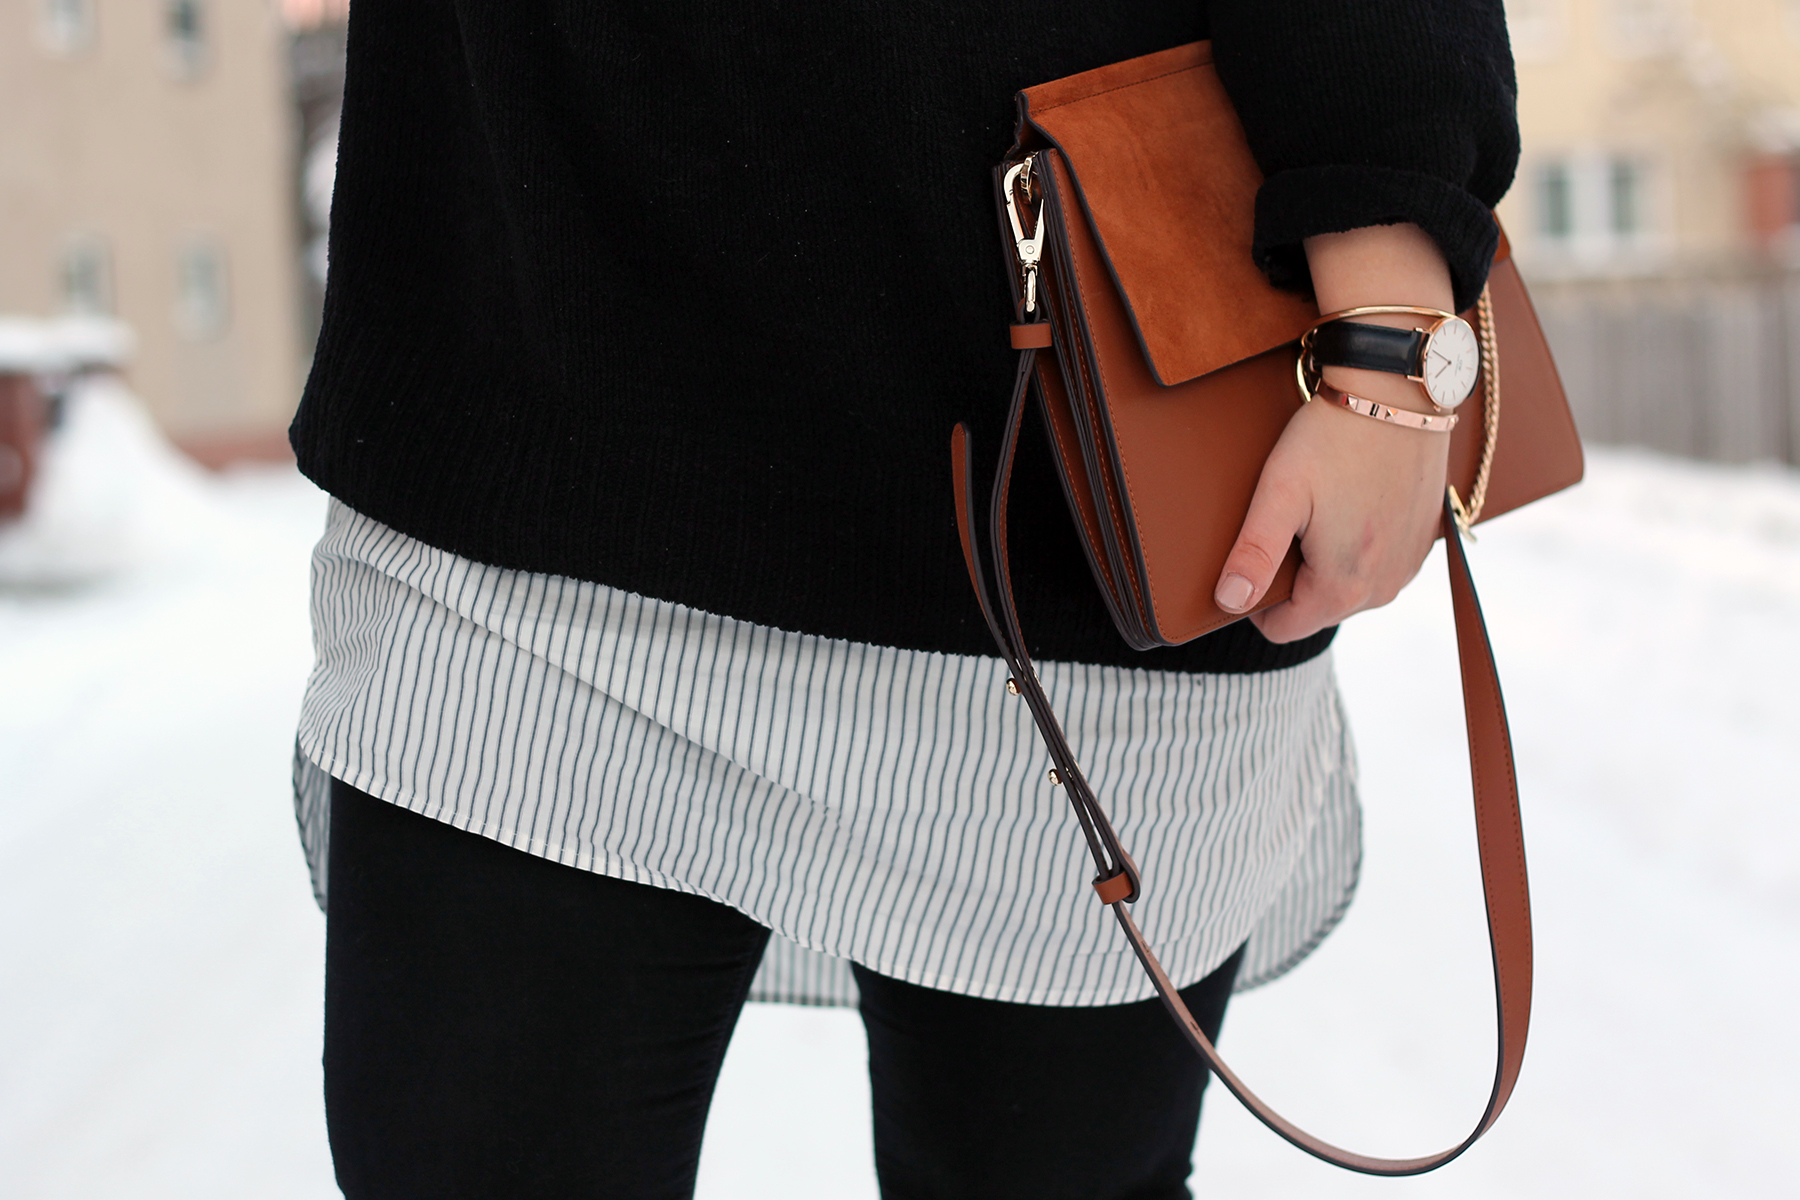 tasche-chloe-pullover-outfit-look-style-modeblog